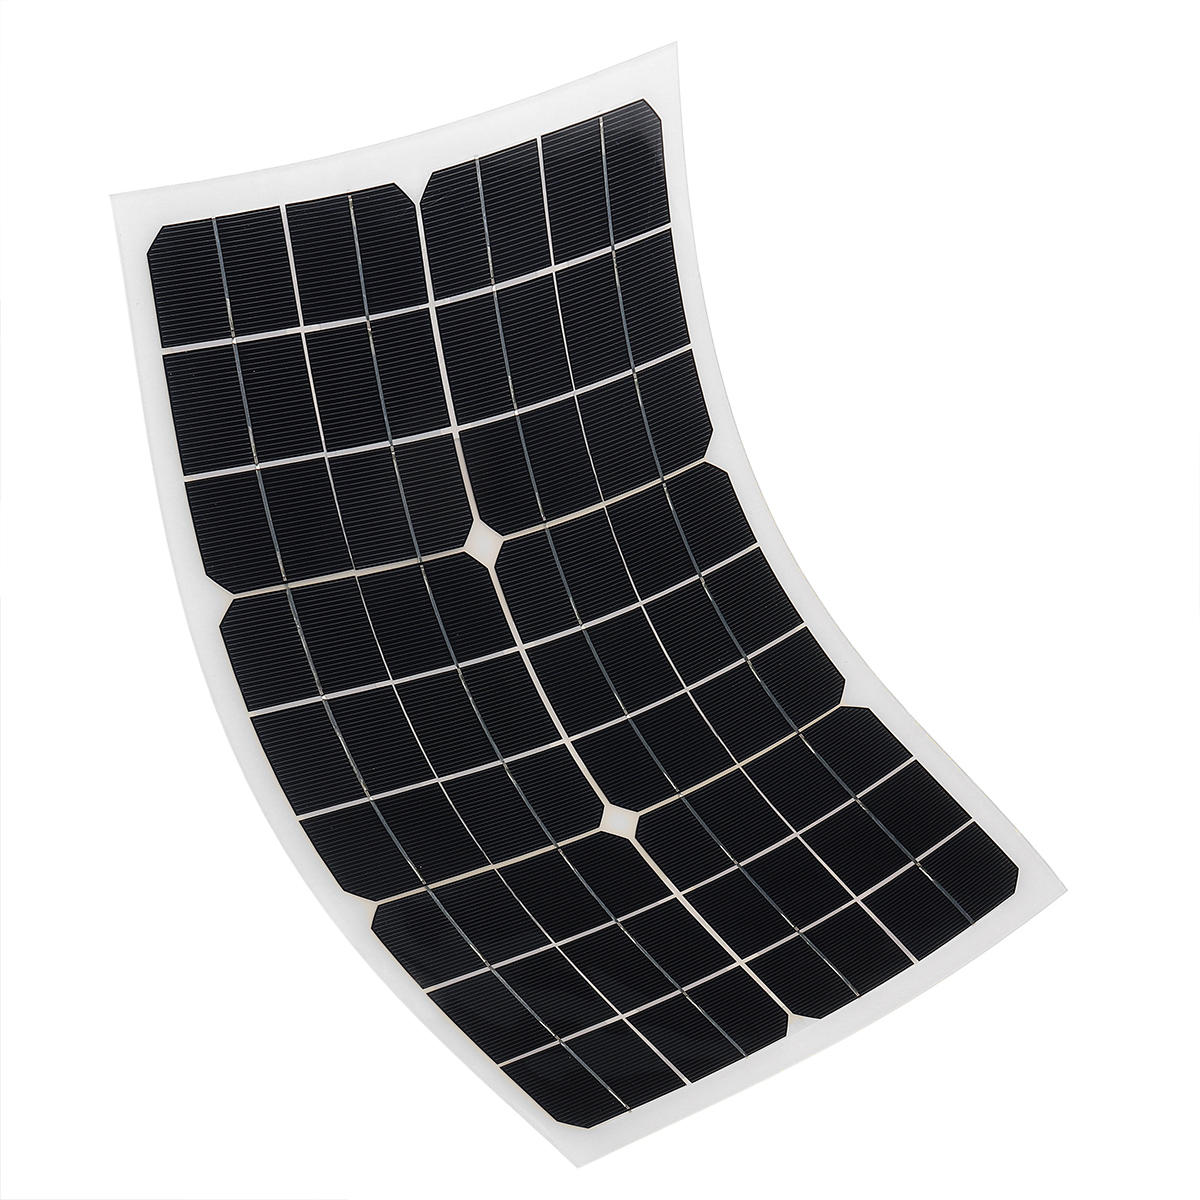 20W 18V Solar Panel with 3m Cables Rear Junction Box for Outdoor Portable Emergency Charging